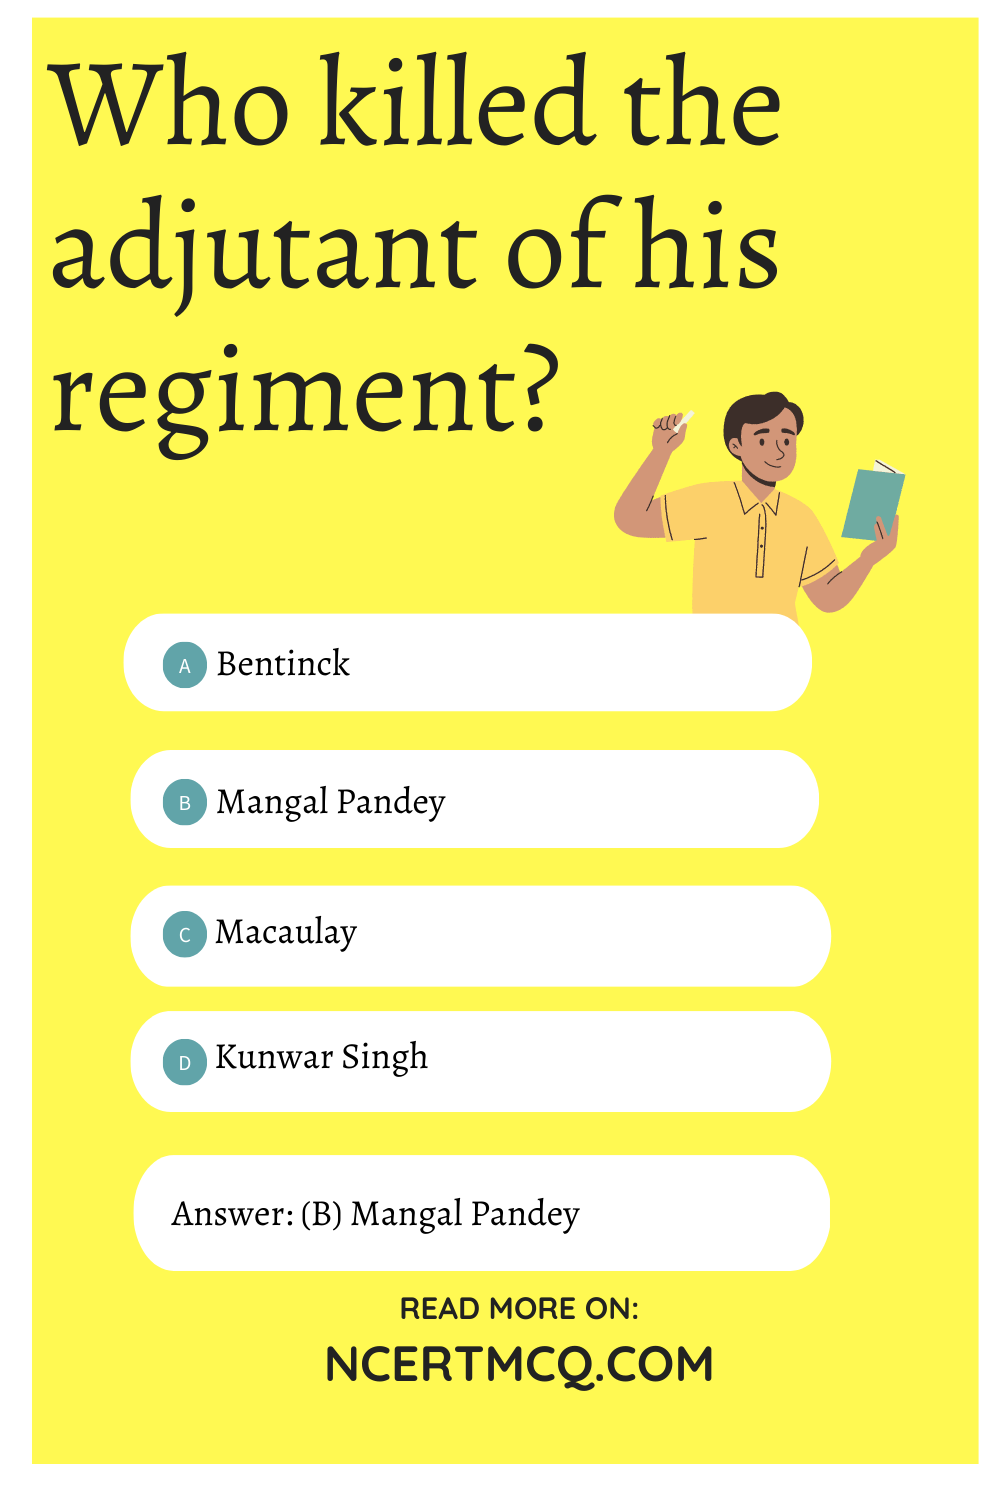 Who killed the adjutant of his regiment?